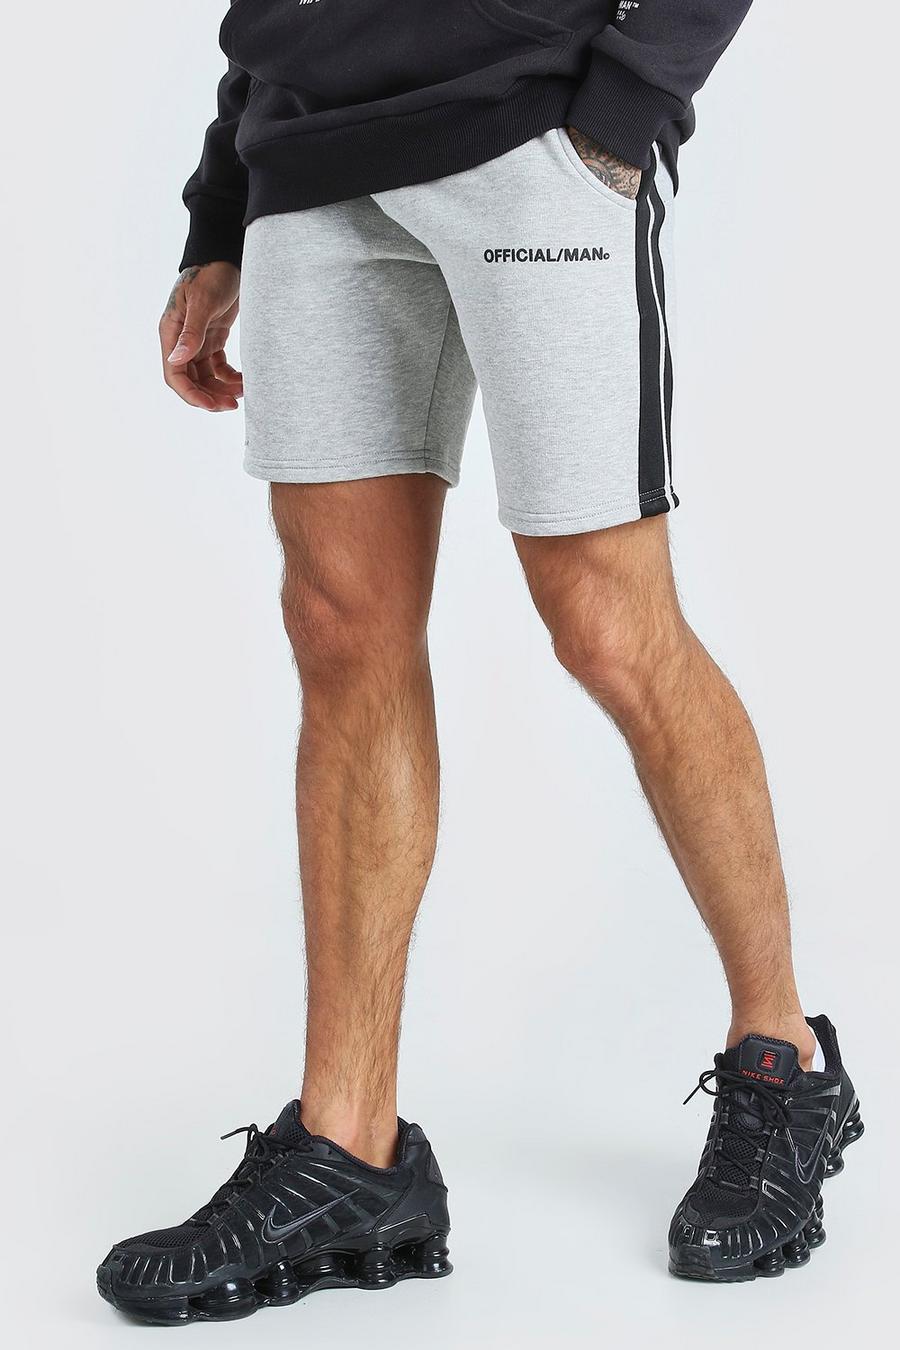 Grijs MAN officiële relaxed fit shorts met band image number 1